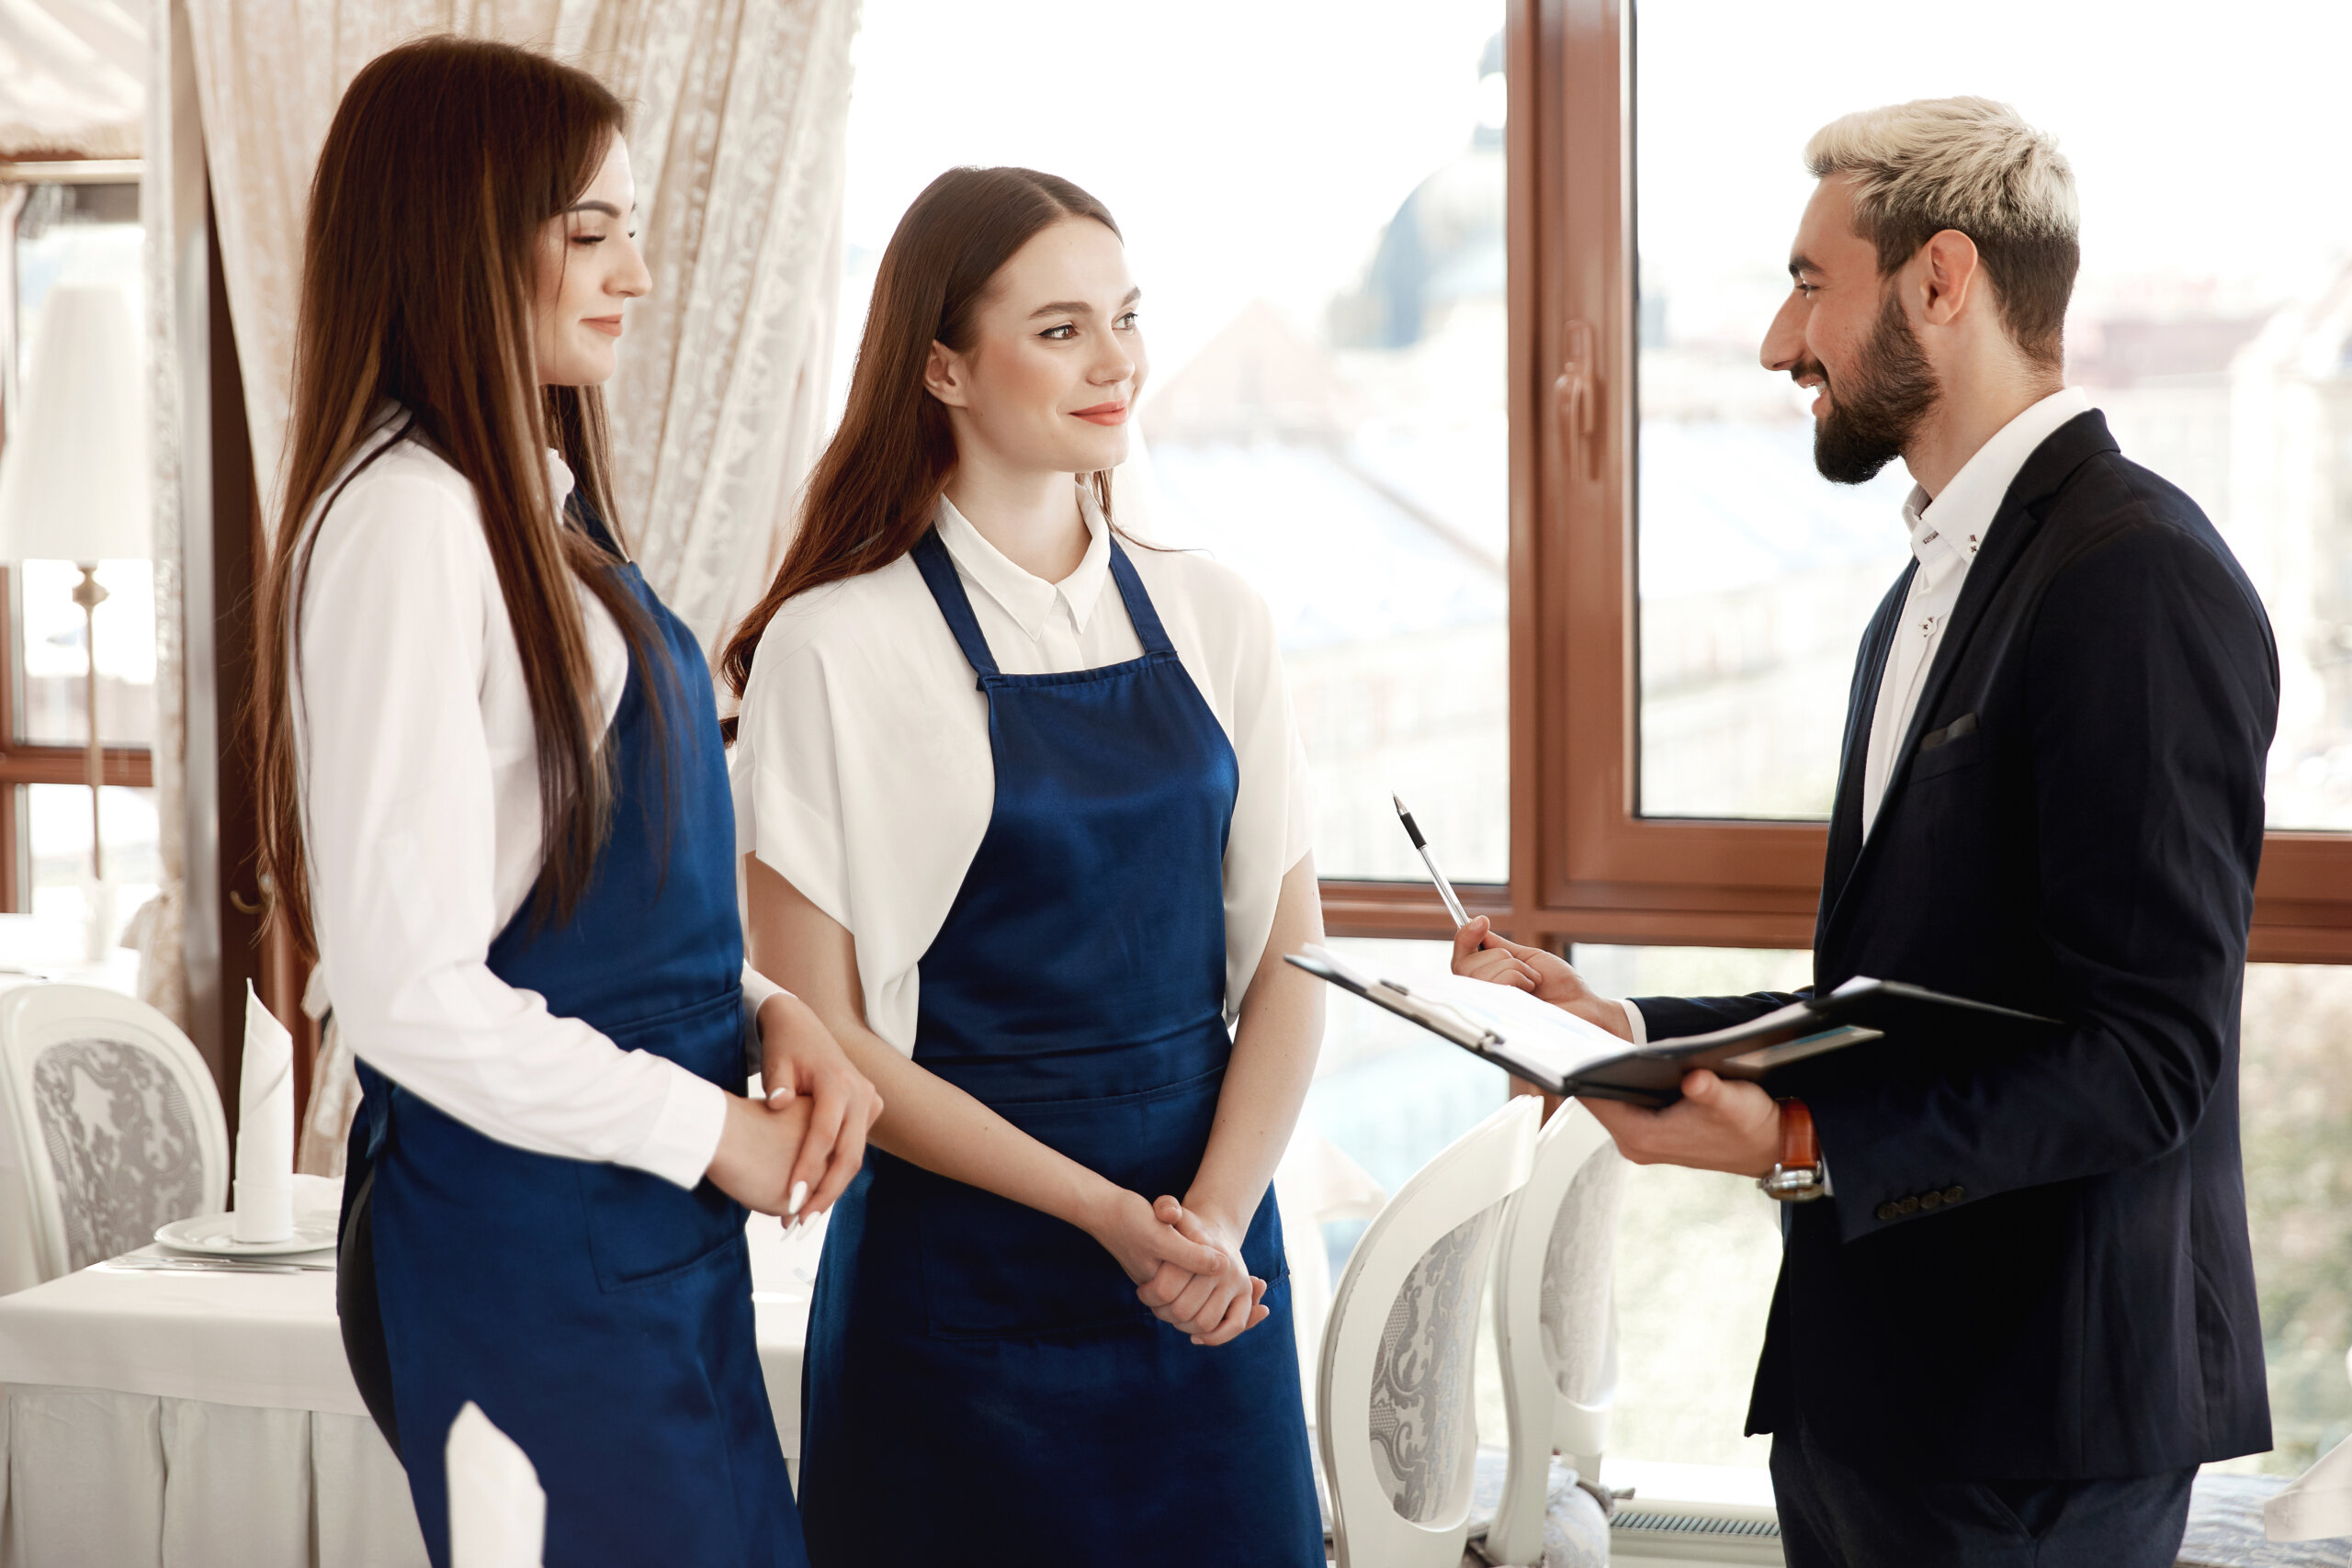 how to handle hotel guest complaints smoothly?